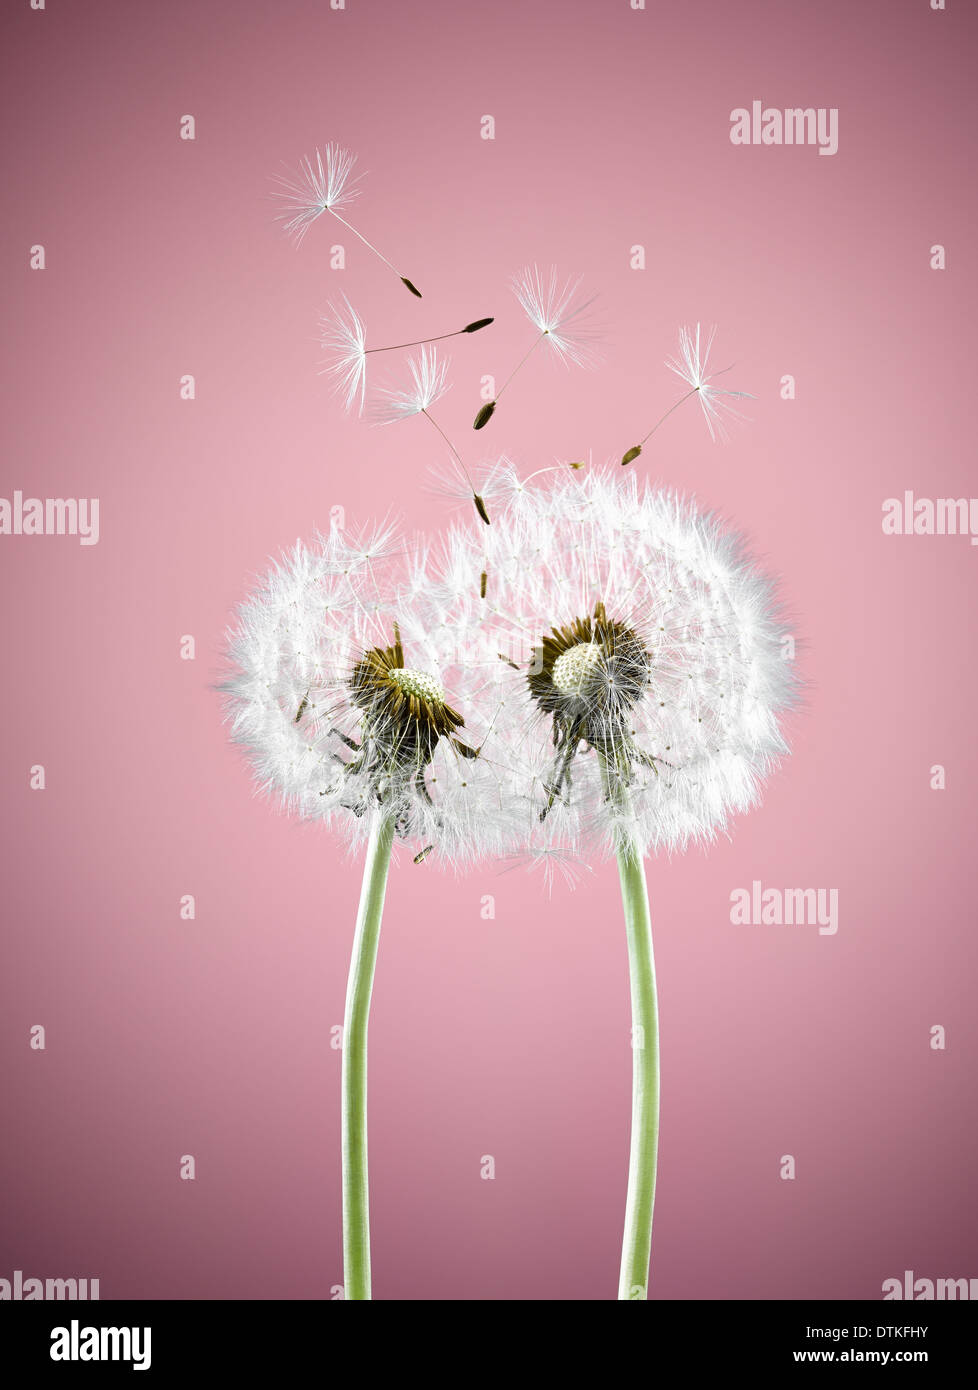 Close up of dandelion plants blowing in wind Stock Photo